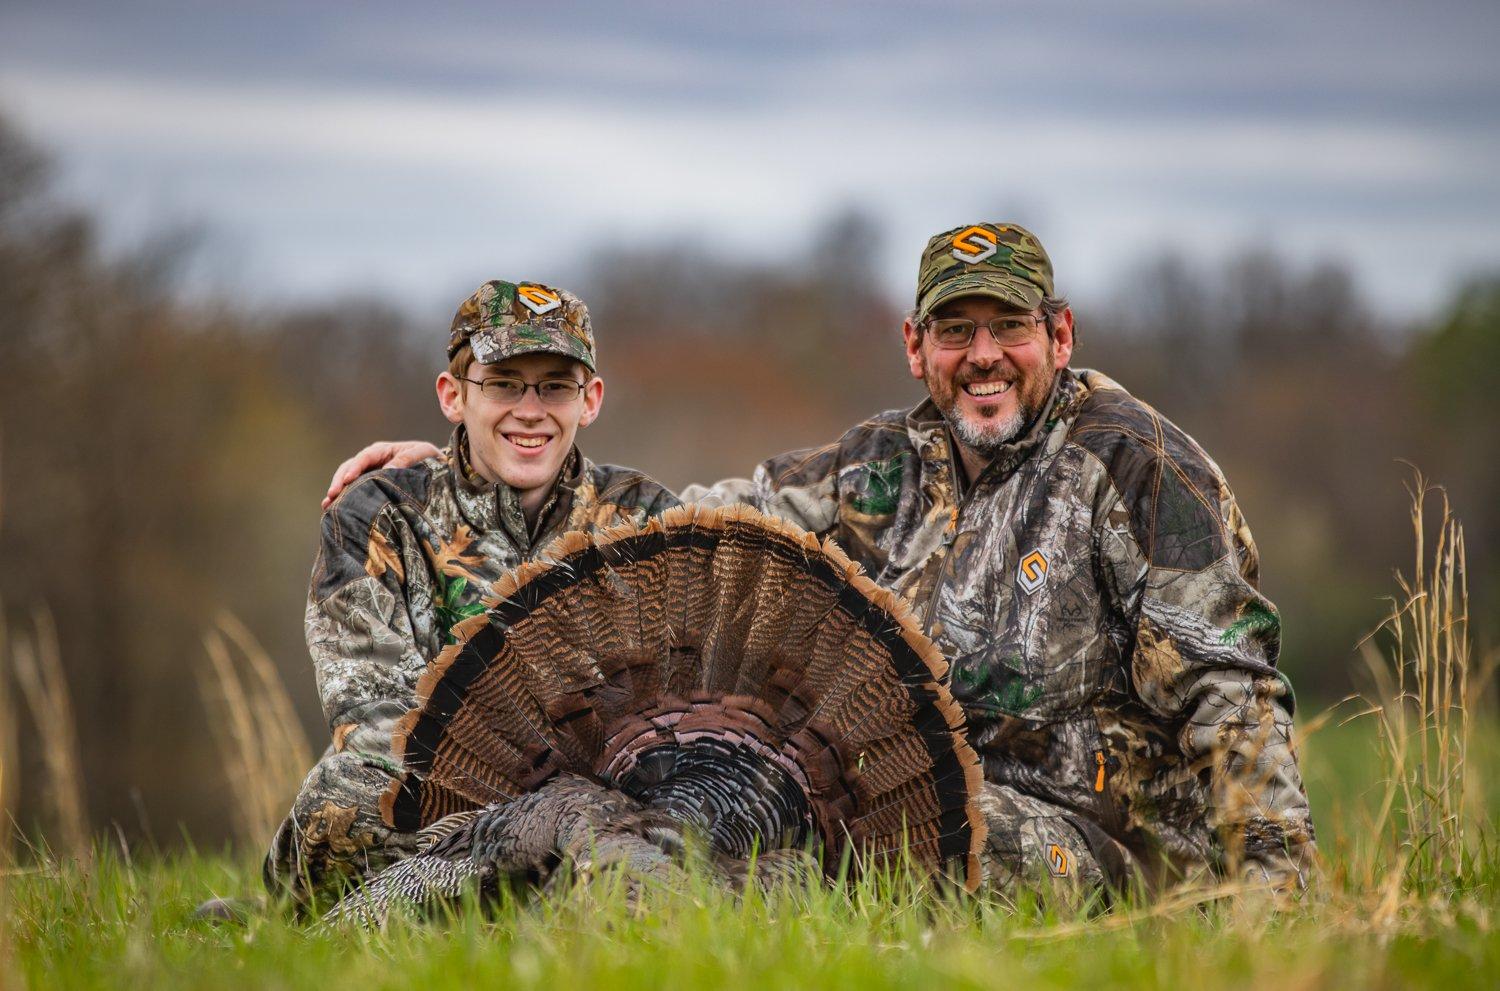 For young turkey hunters, confidence is key. Image by Jason Say / Wired Outdoors